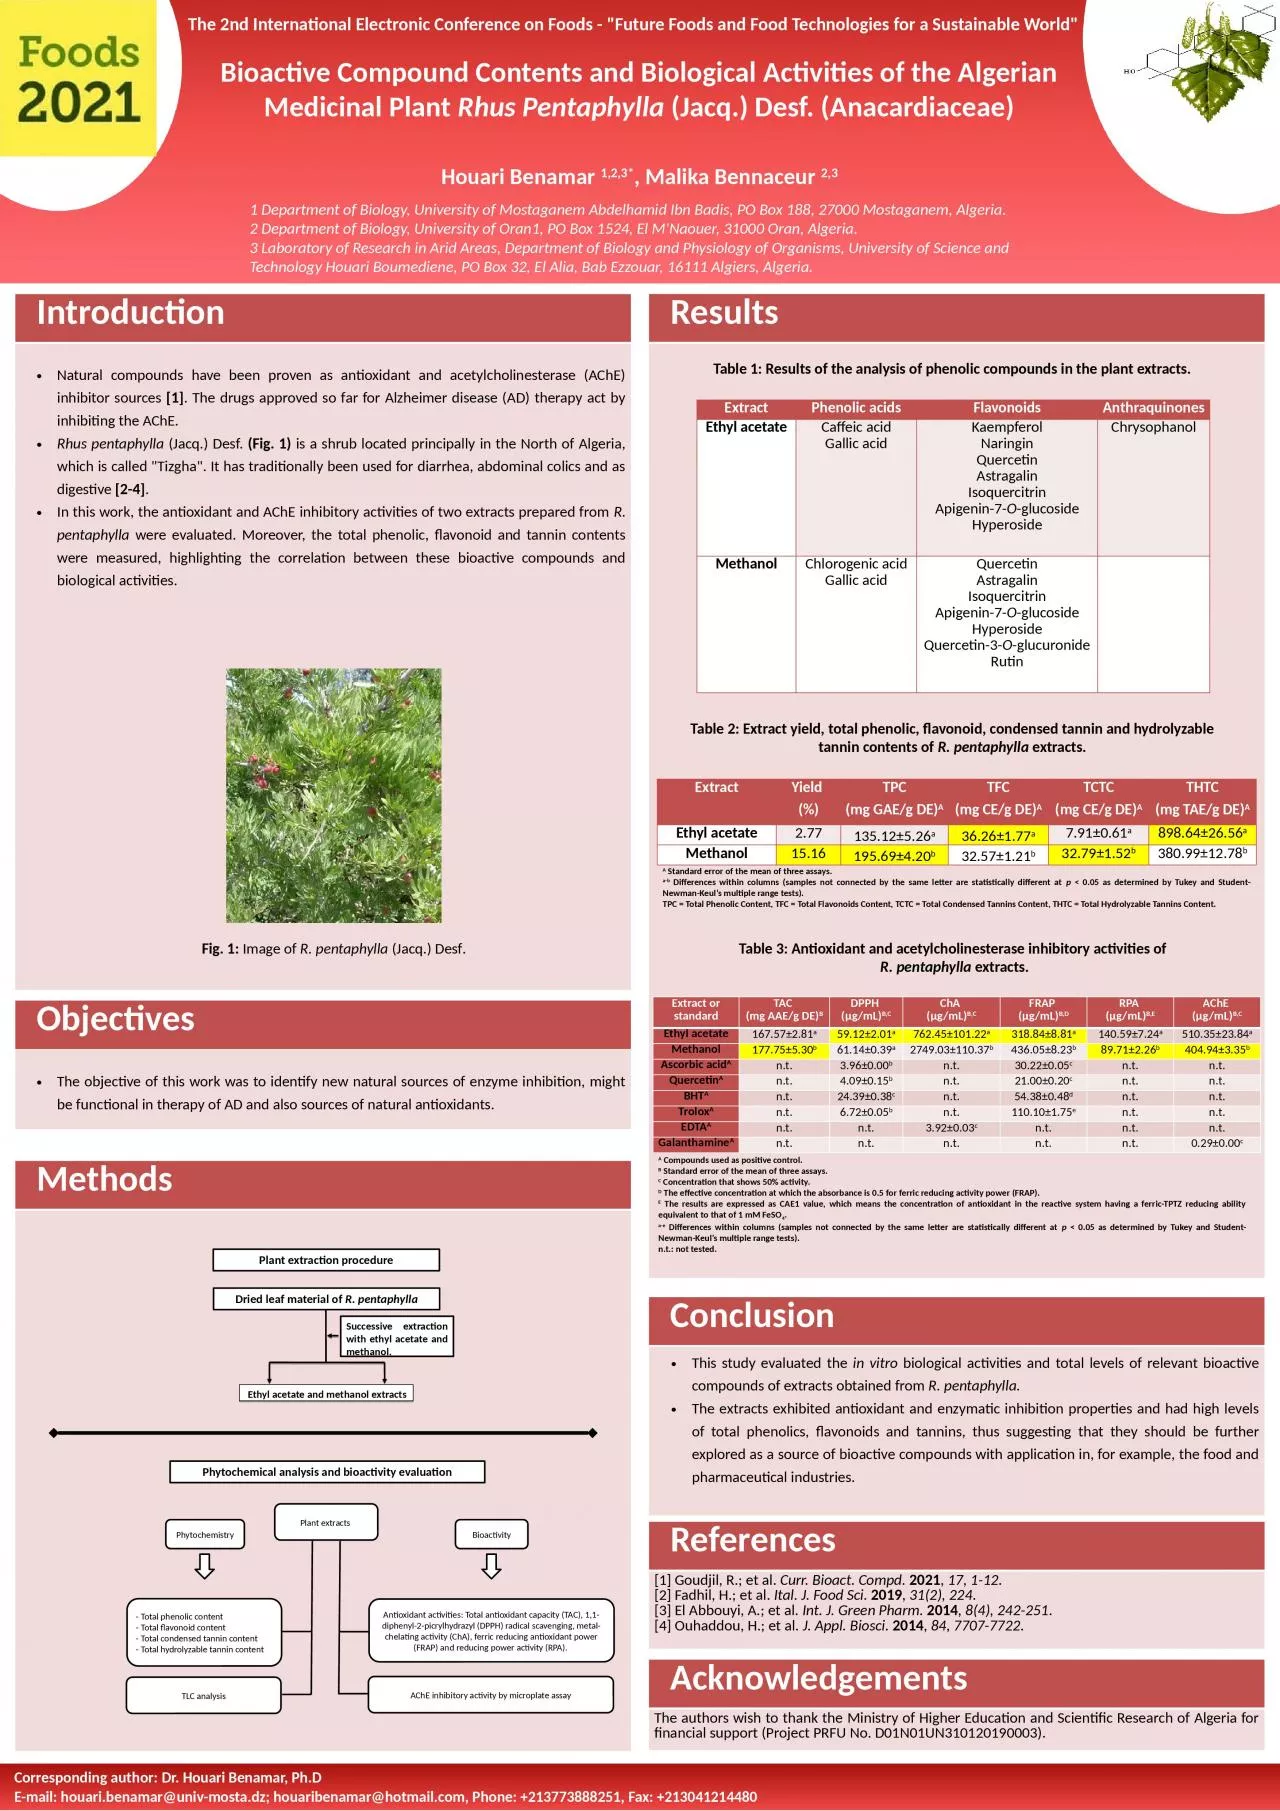 Bioactive Compound Contents and Biological Activities of the Algerian Medicinal Plant 